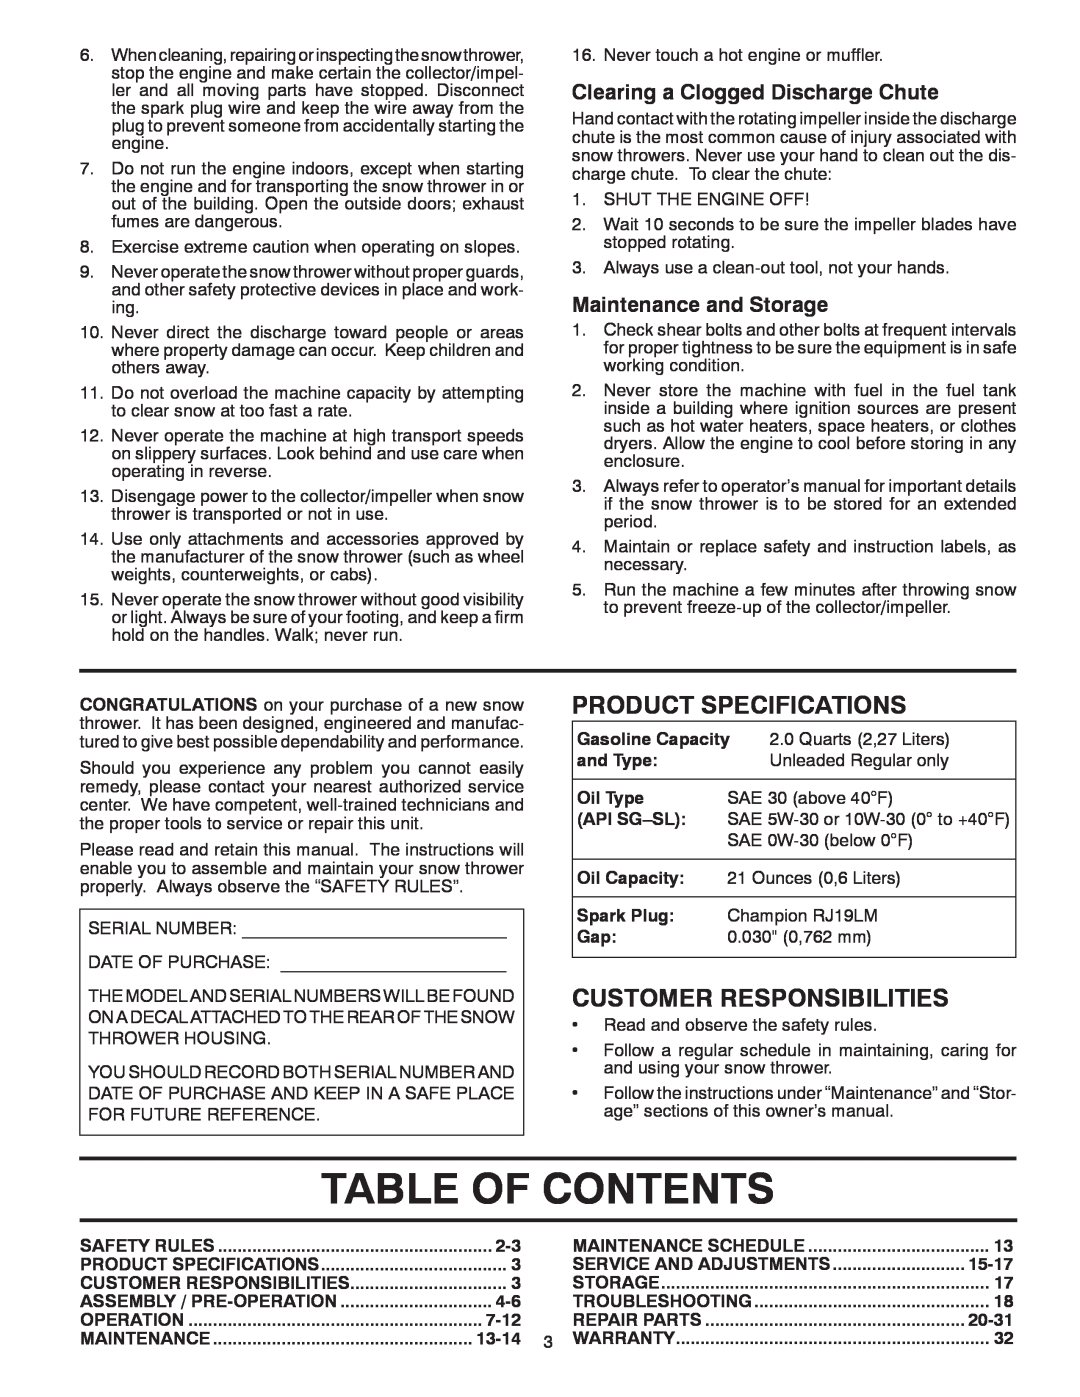 Poulan 418962 Table Of Contents, Product Specifications, Customer Responsibilities, Clearing a Clogged Discharge Chute 